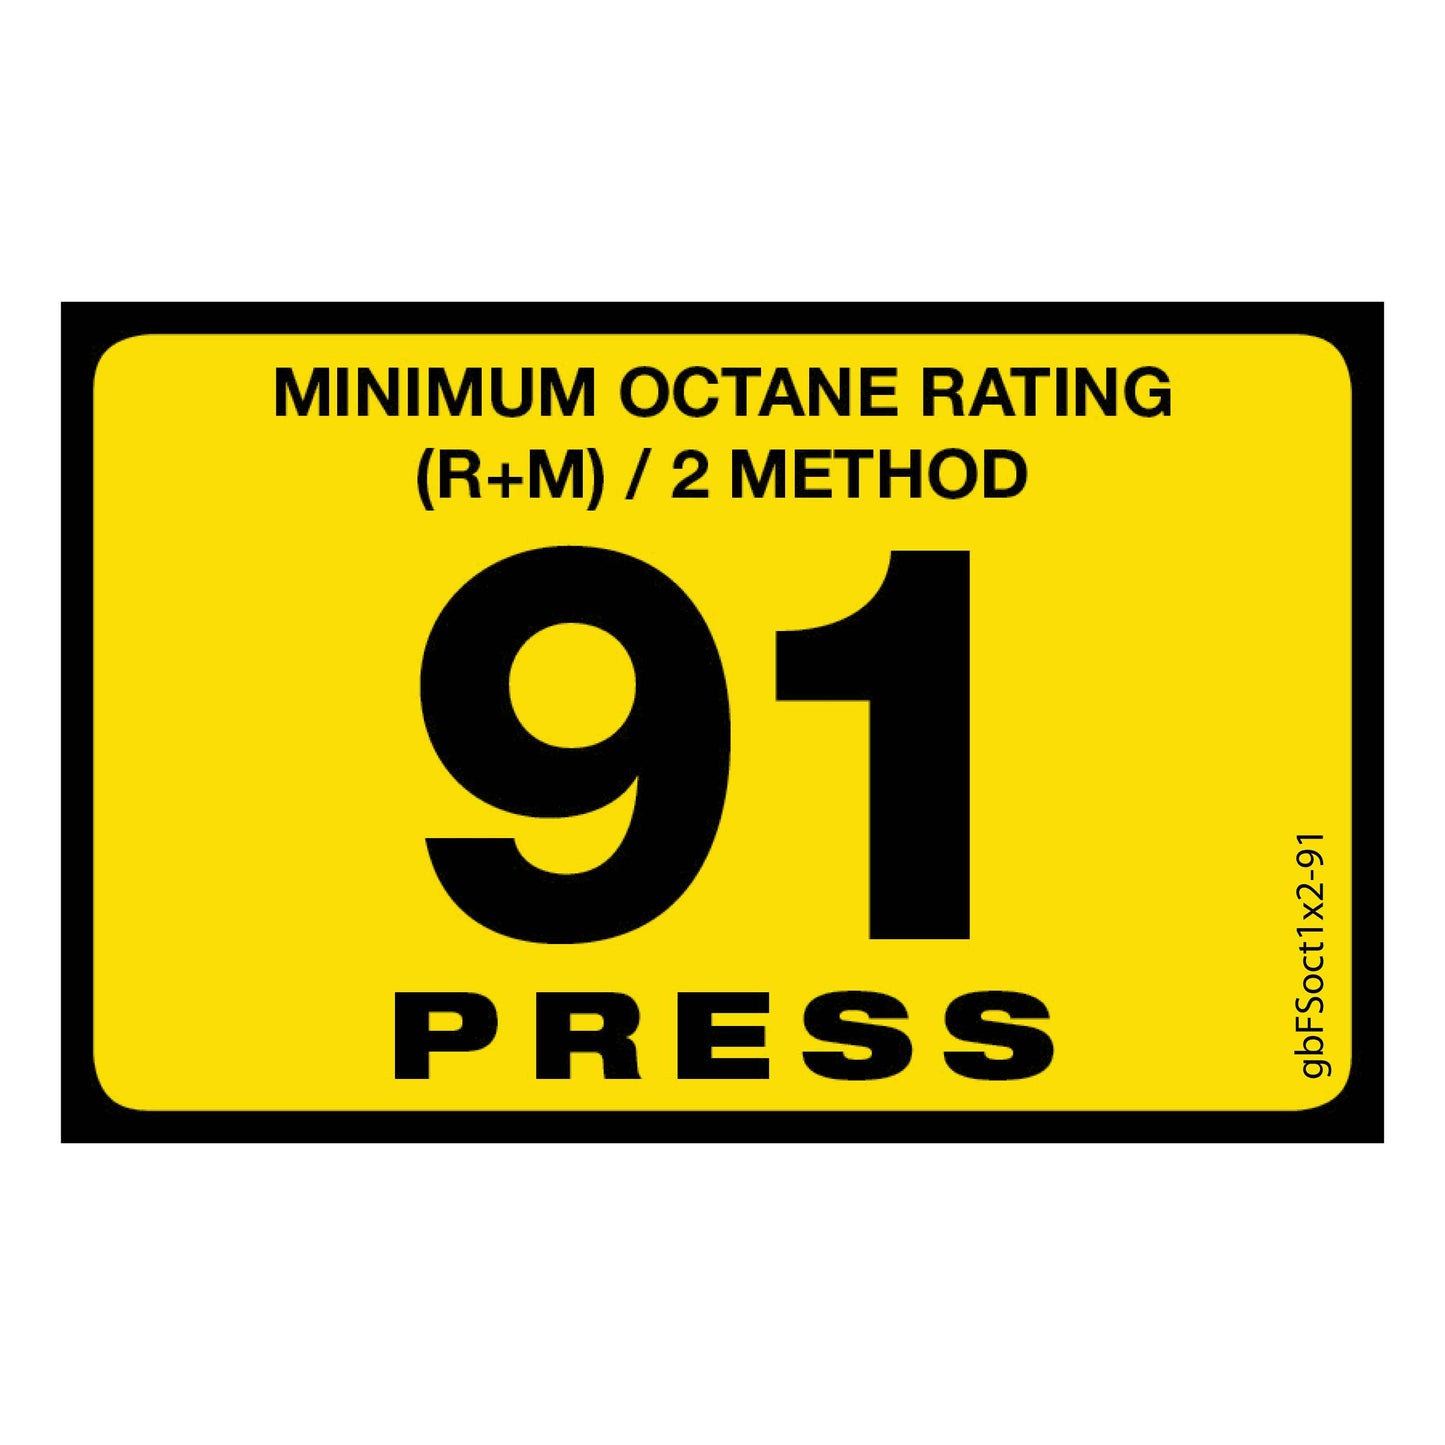 91 Press Octane Rating Decal. 1 inch by 2 inches in size. 